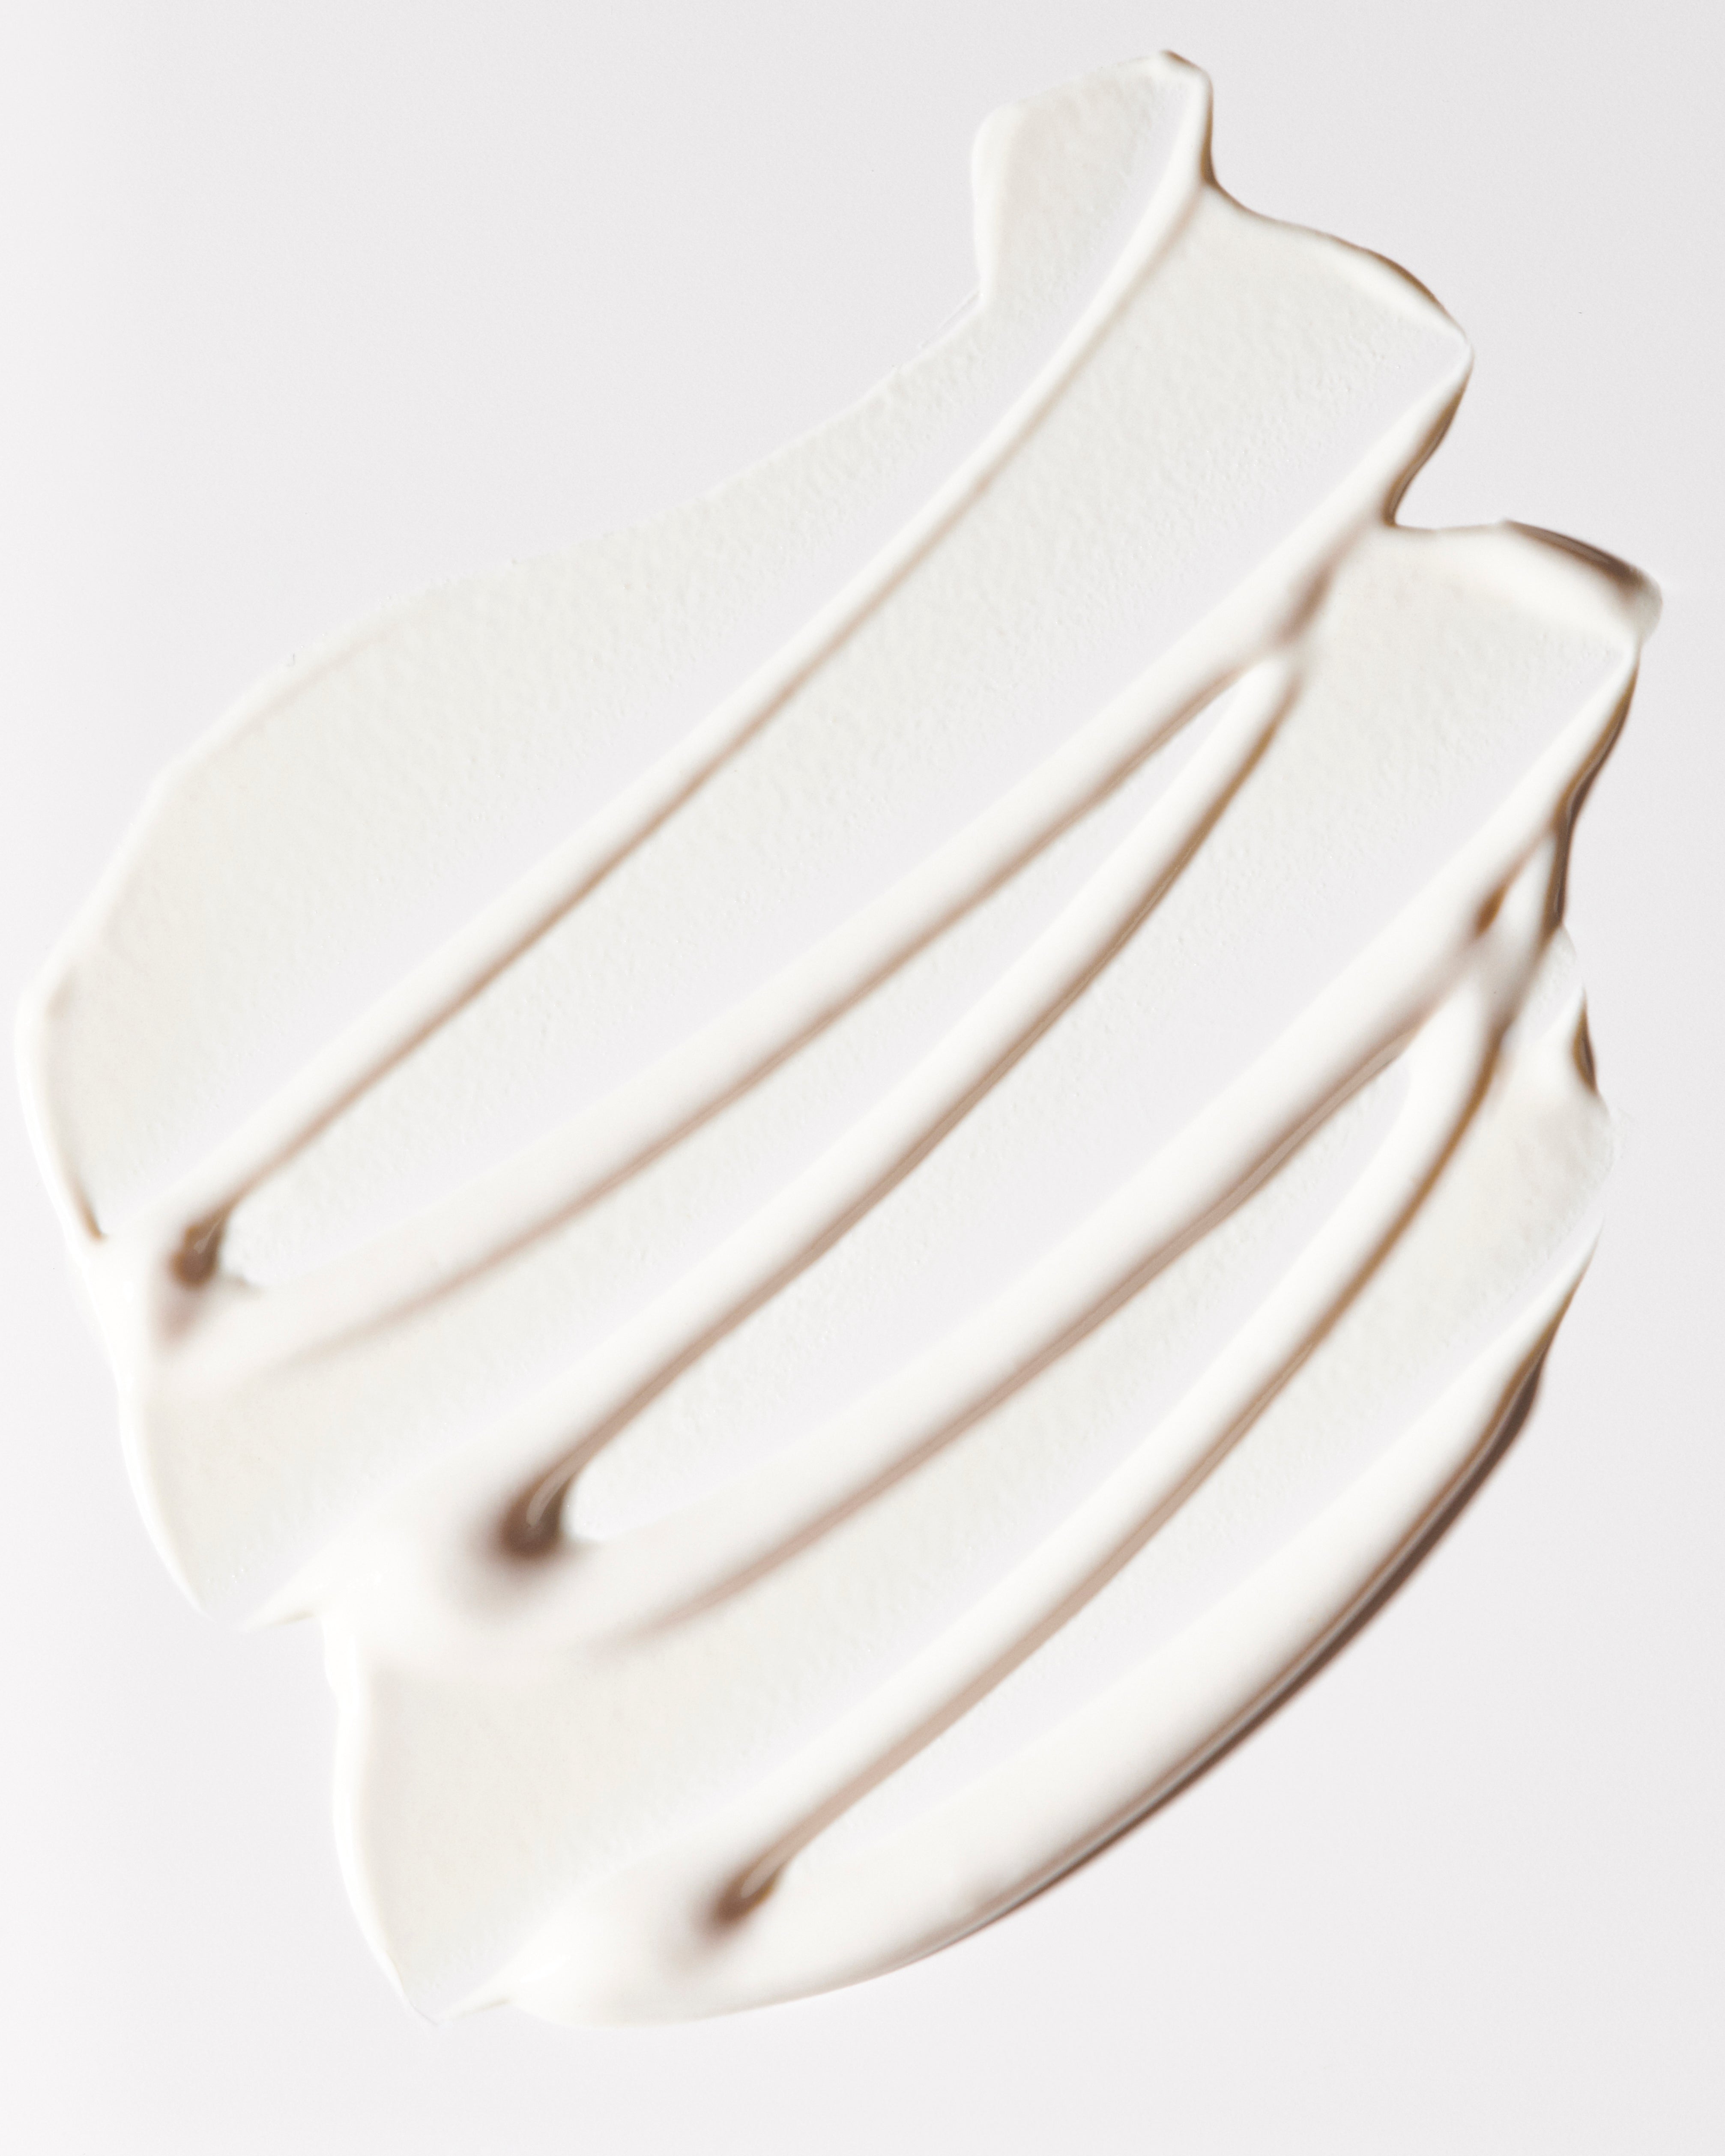 A close-up of Freaks of Nature Skincare's Daily System SPF 30 Sunscreen smeared on a smooth, white surface, forming an abstract pattern with four diagonal stripes. The texture appears soft and creamy.